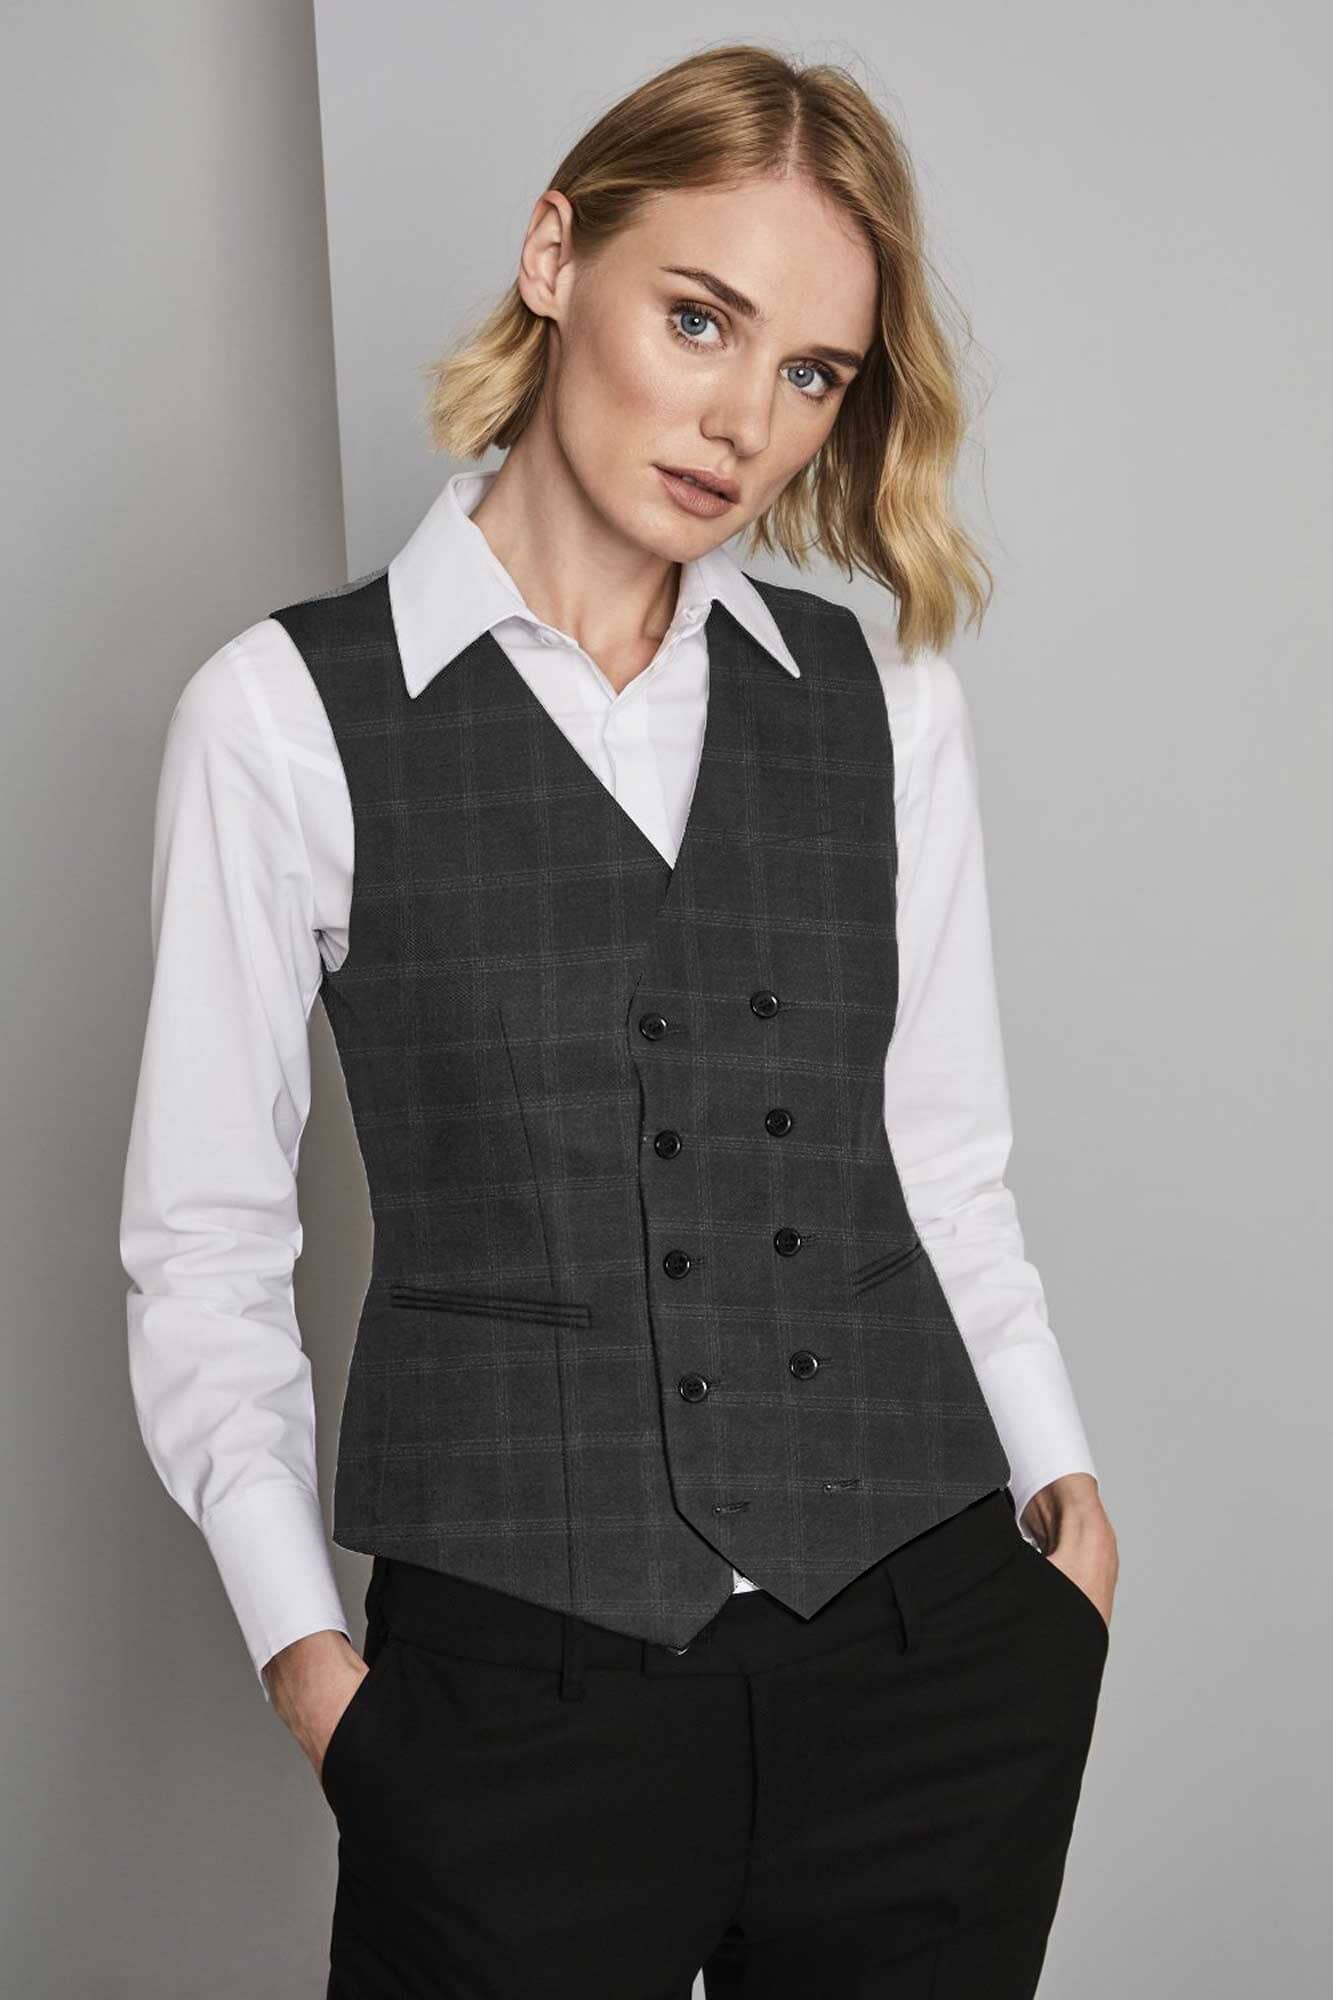 HM Women's Authentic Checked Waistcoat with Pockets 🧥🕴️🔥 Women's Waistcoat First Choice S-44 